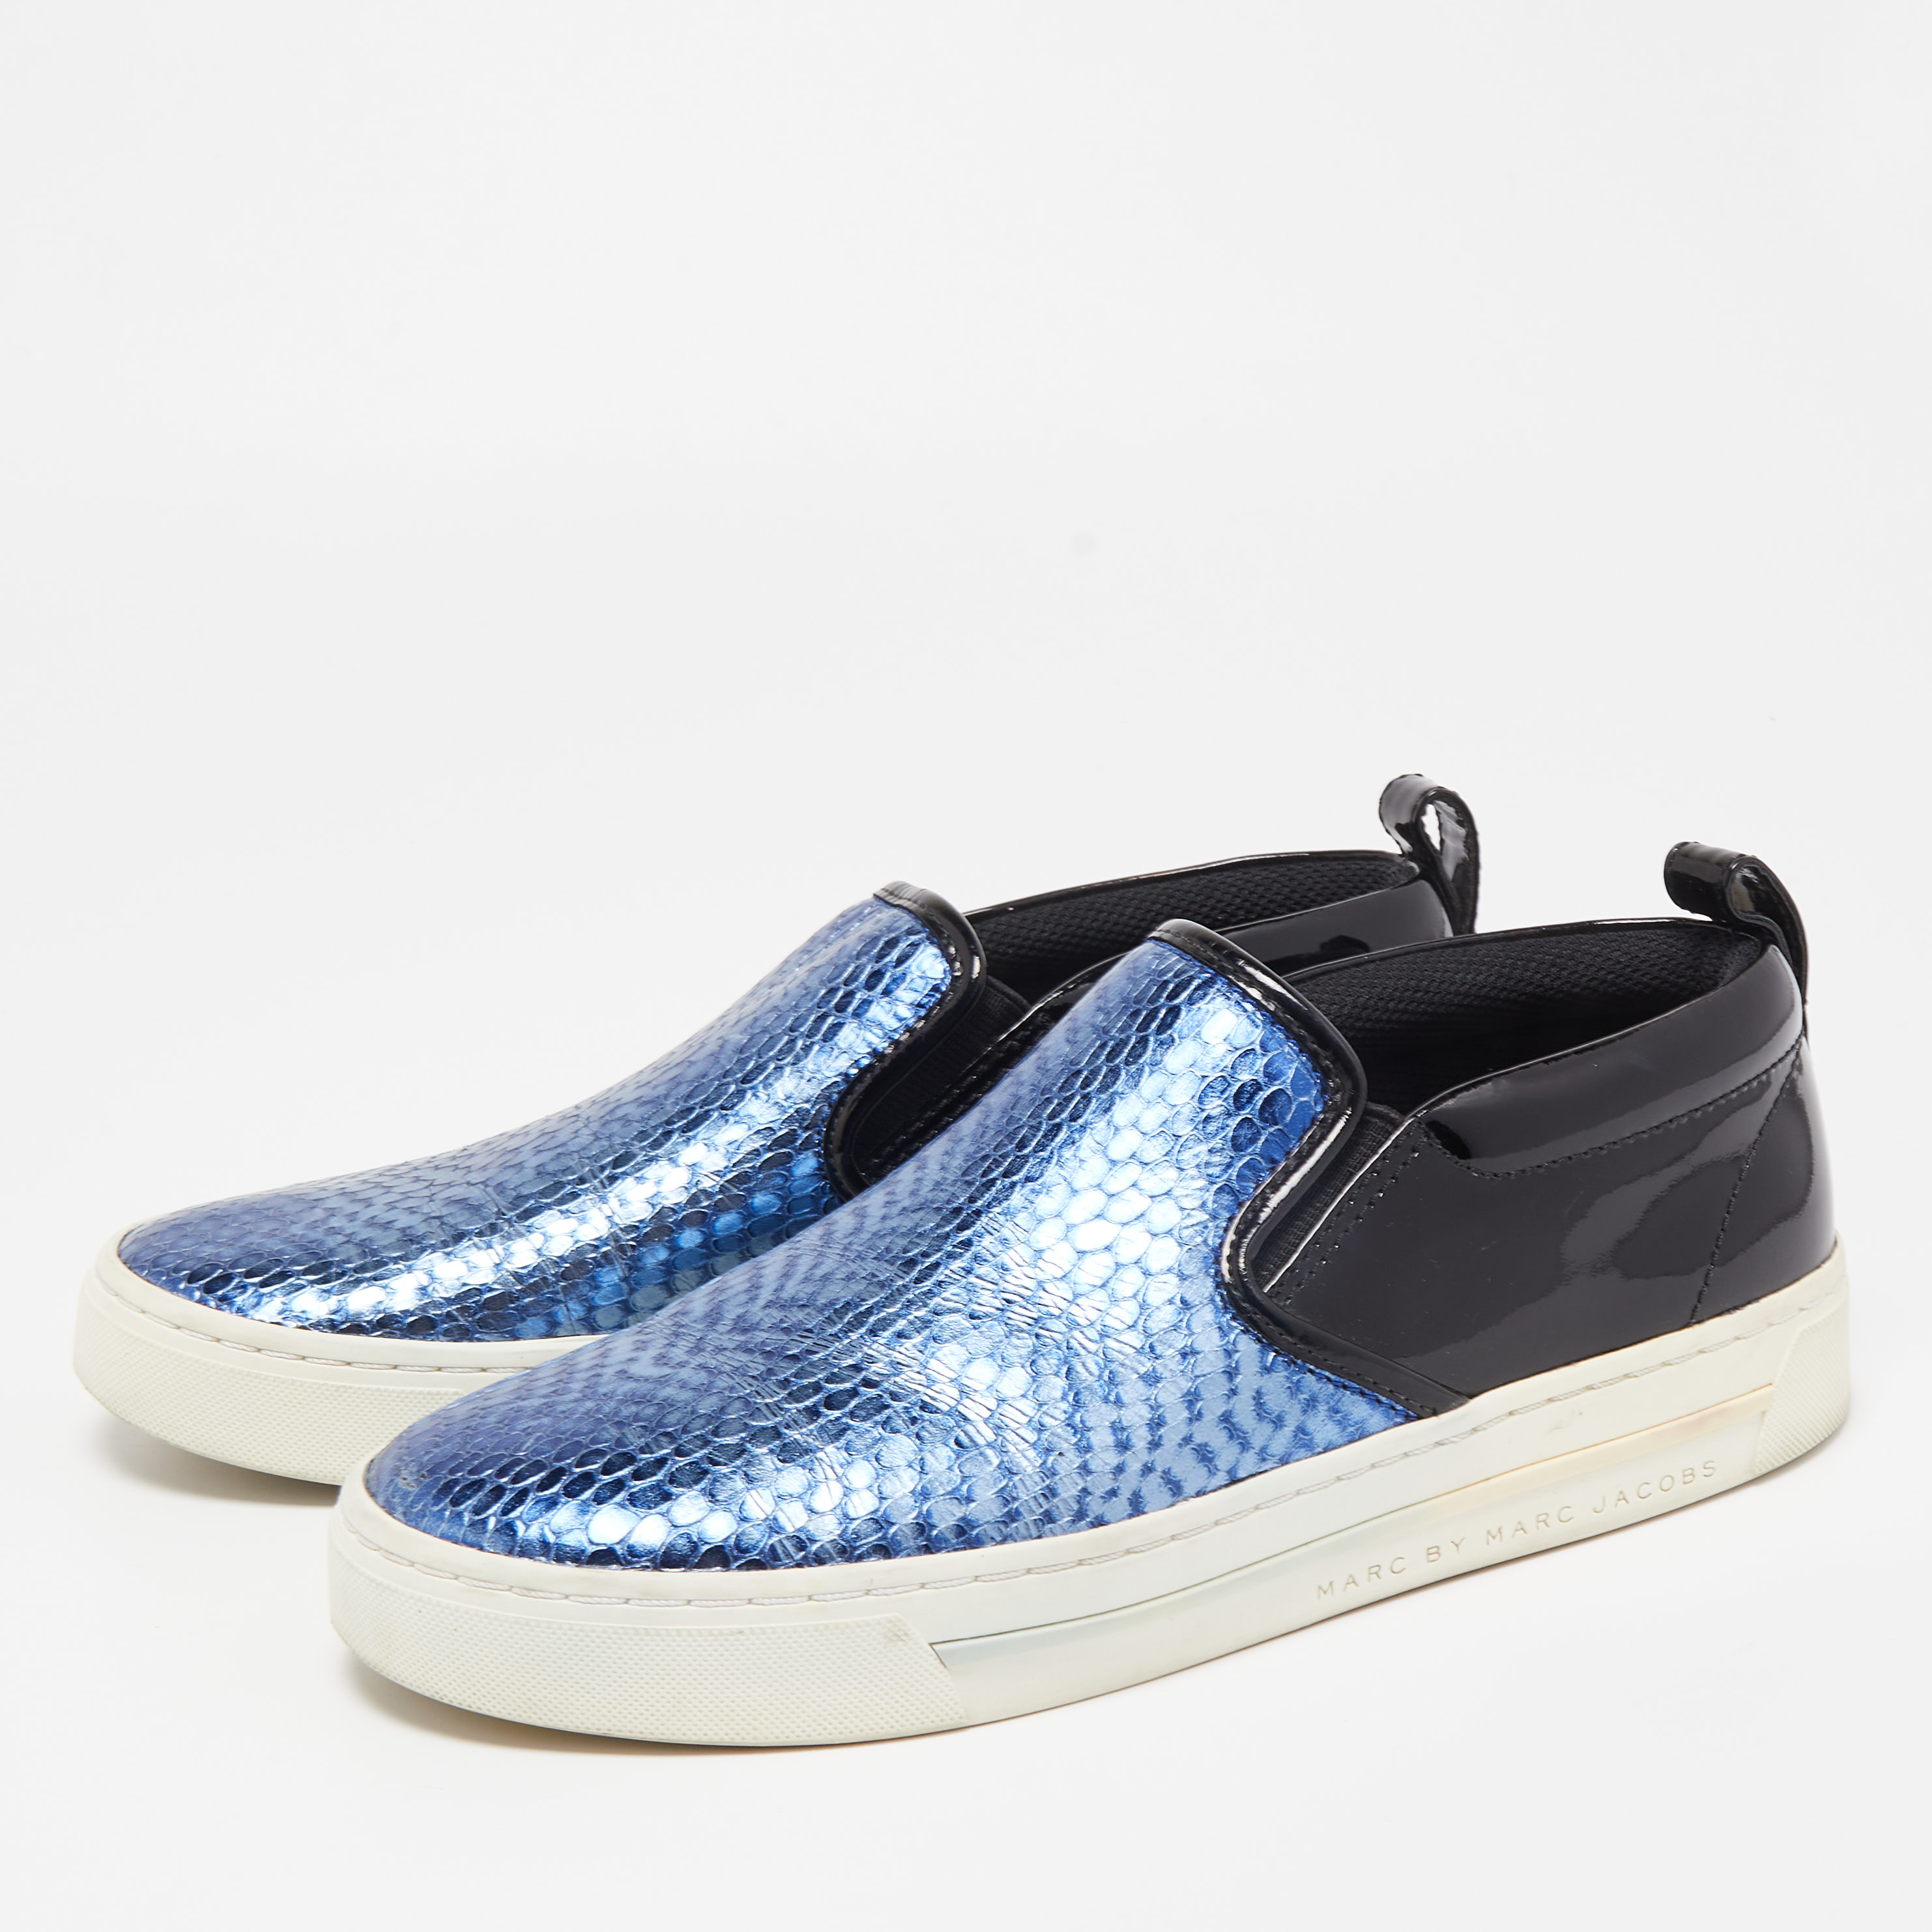 

Marc by Marc Jacobs Blue/Black Patent and Python Embossed Leather Broome Sneakers Size